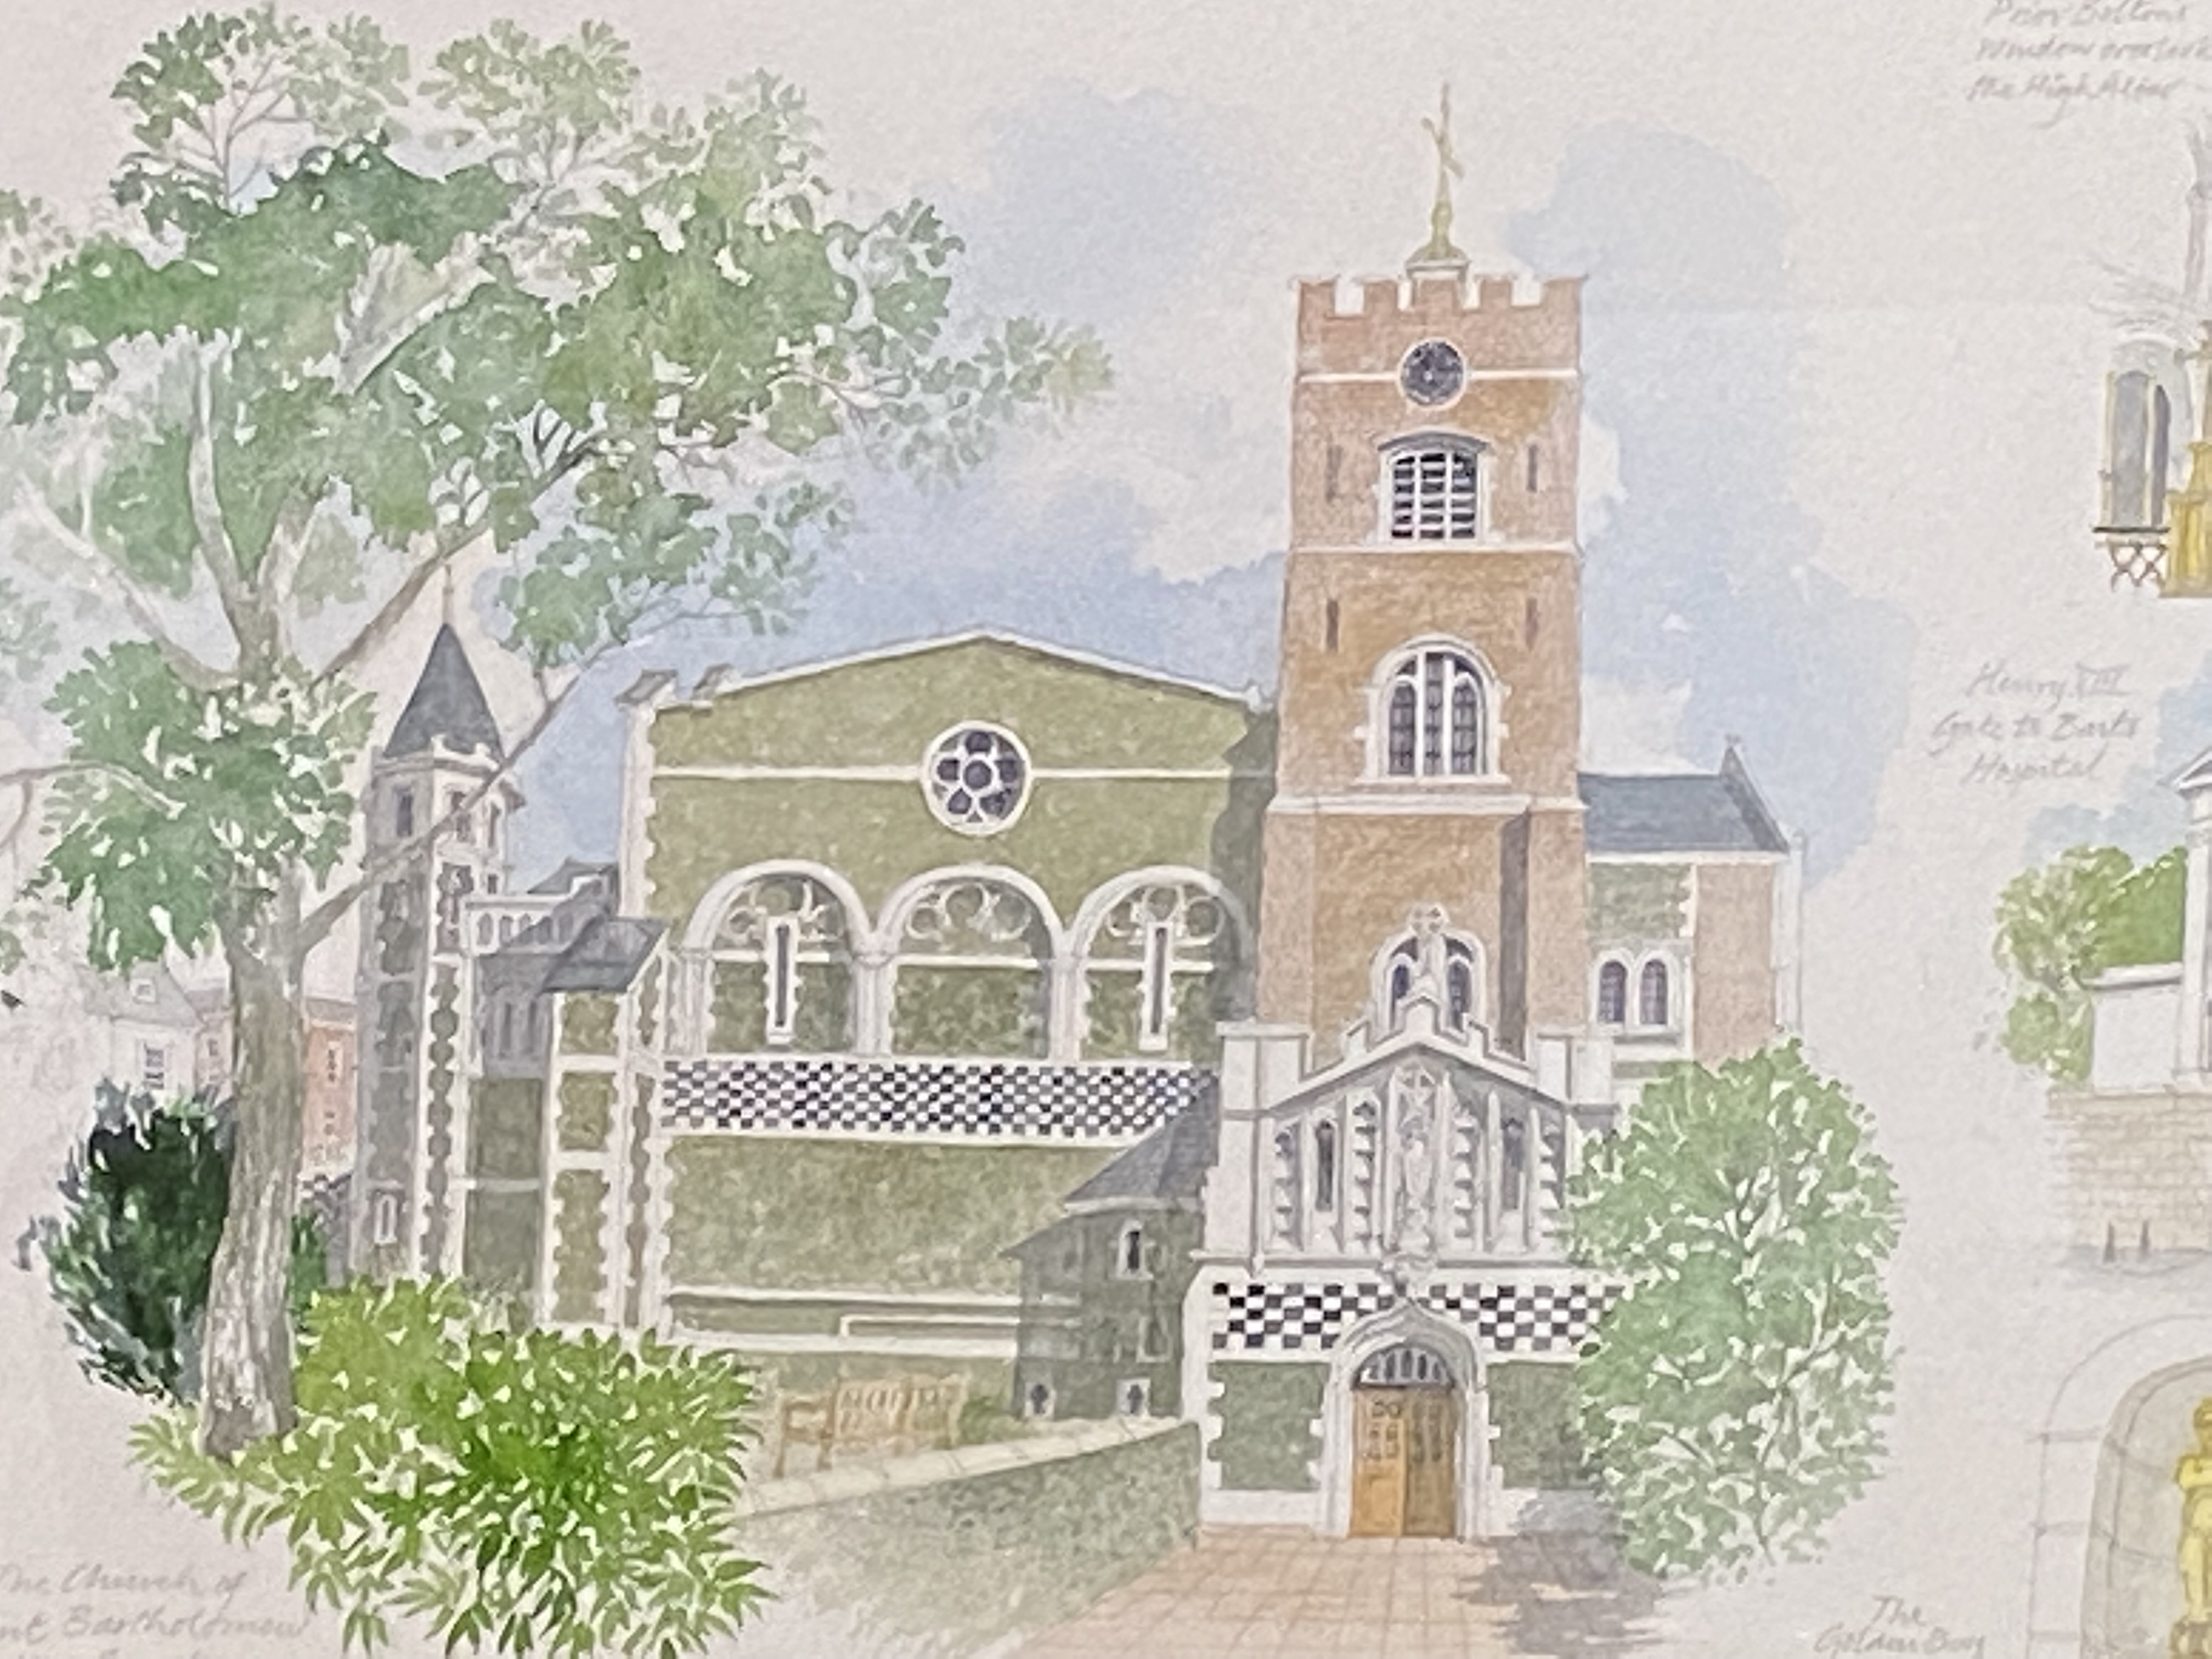 Watercolour of the Church of St. Bartholomew the Great - Image 3 of 5